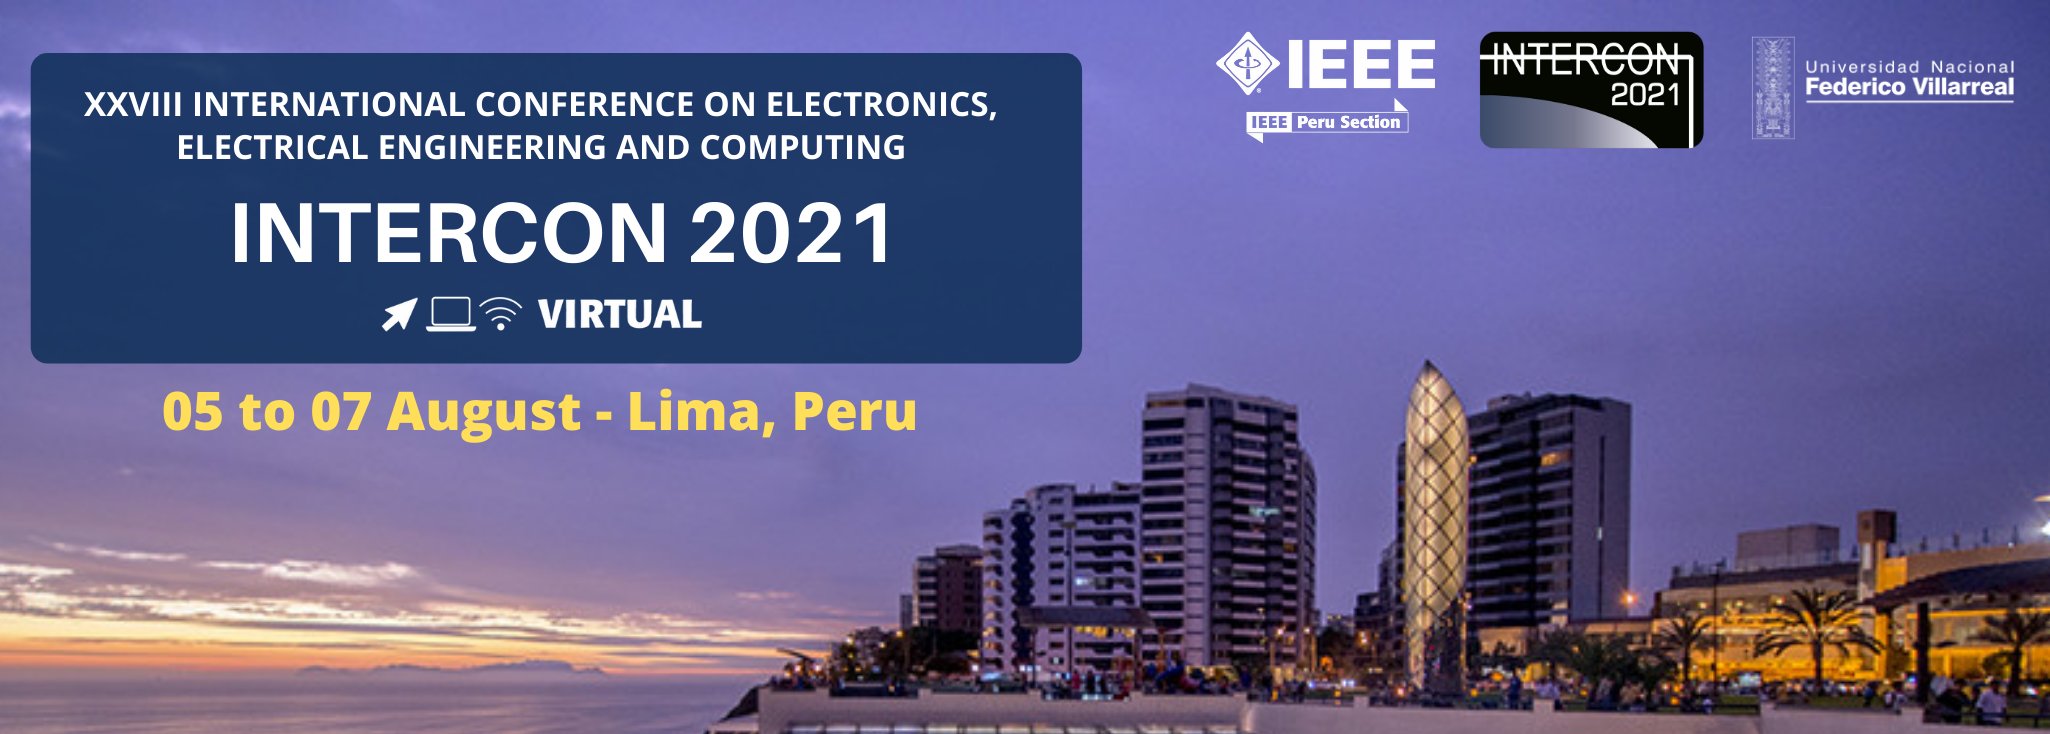 IEEE Peru Section